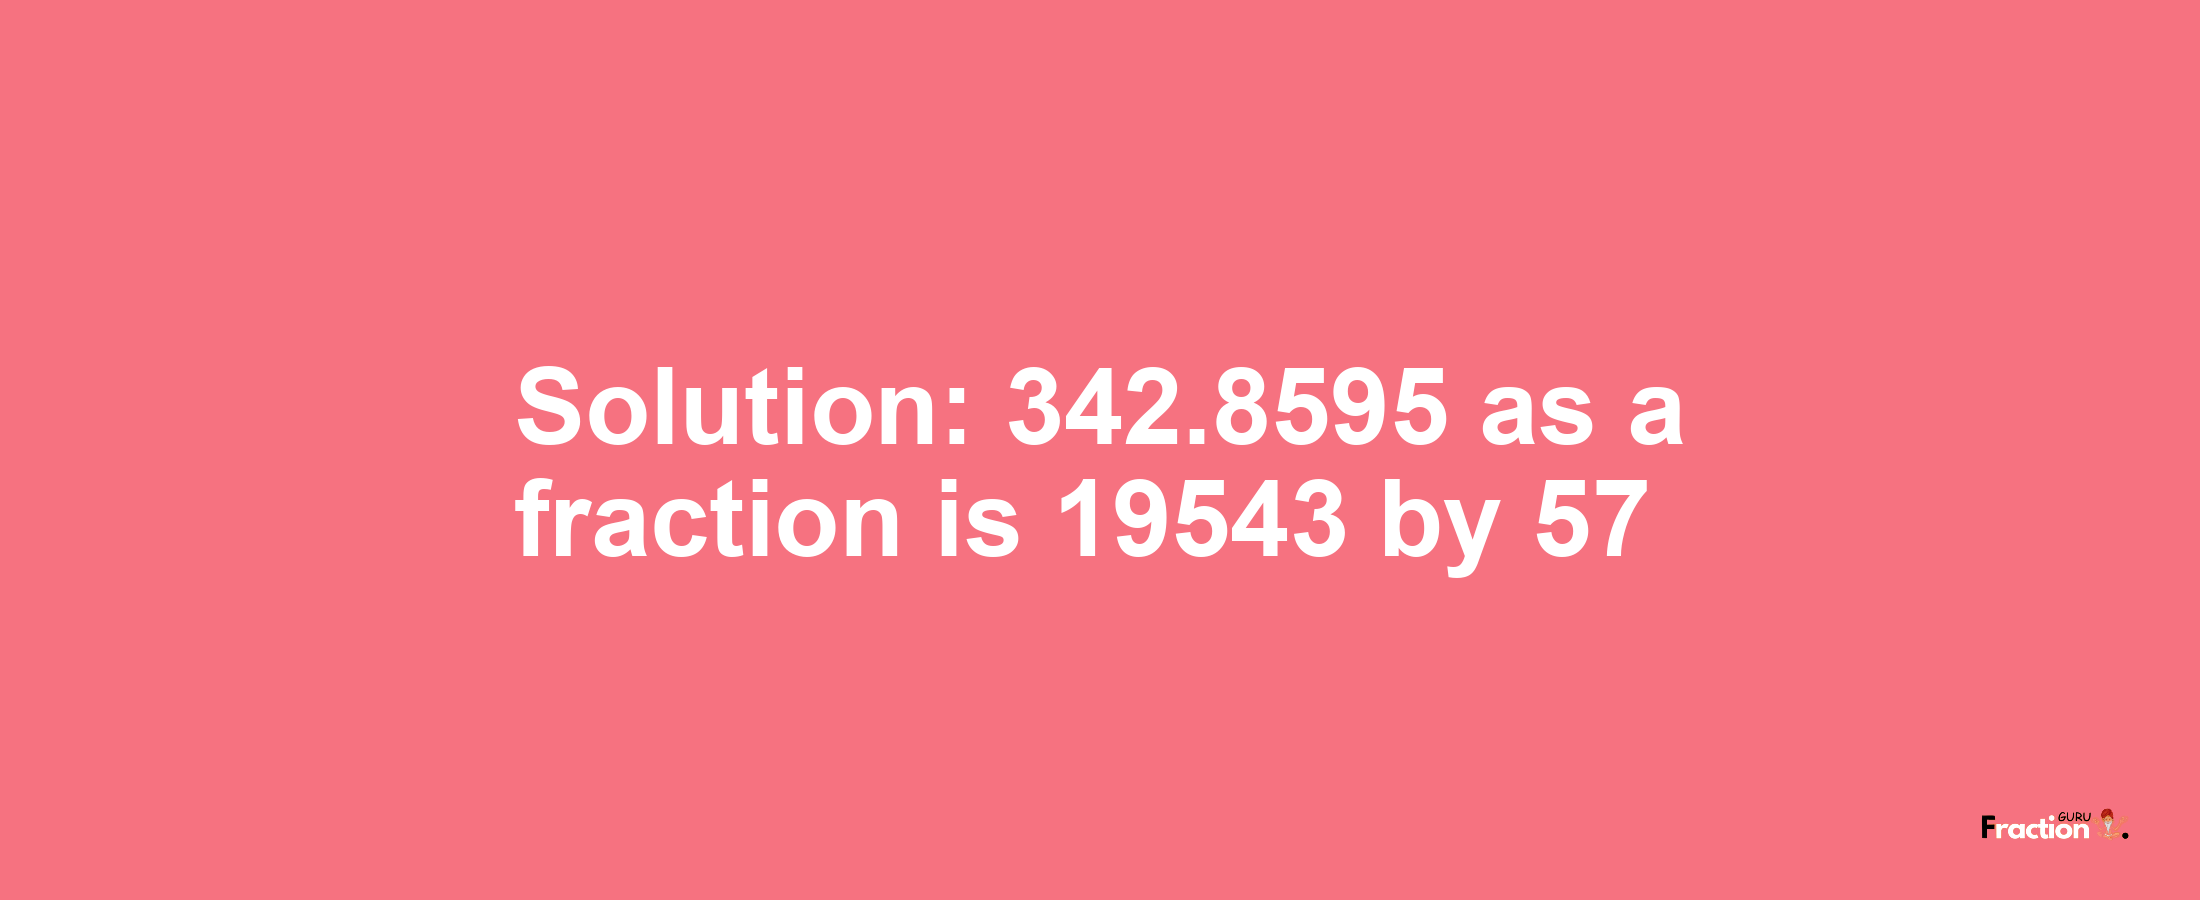 Solution:342.8595 as a fraction is 19543/57